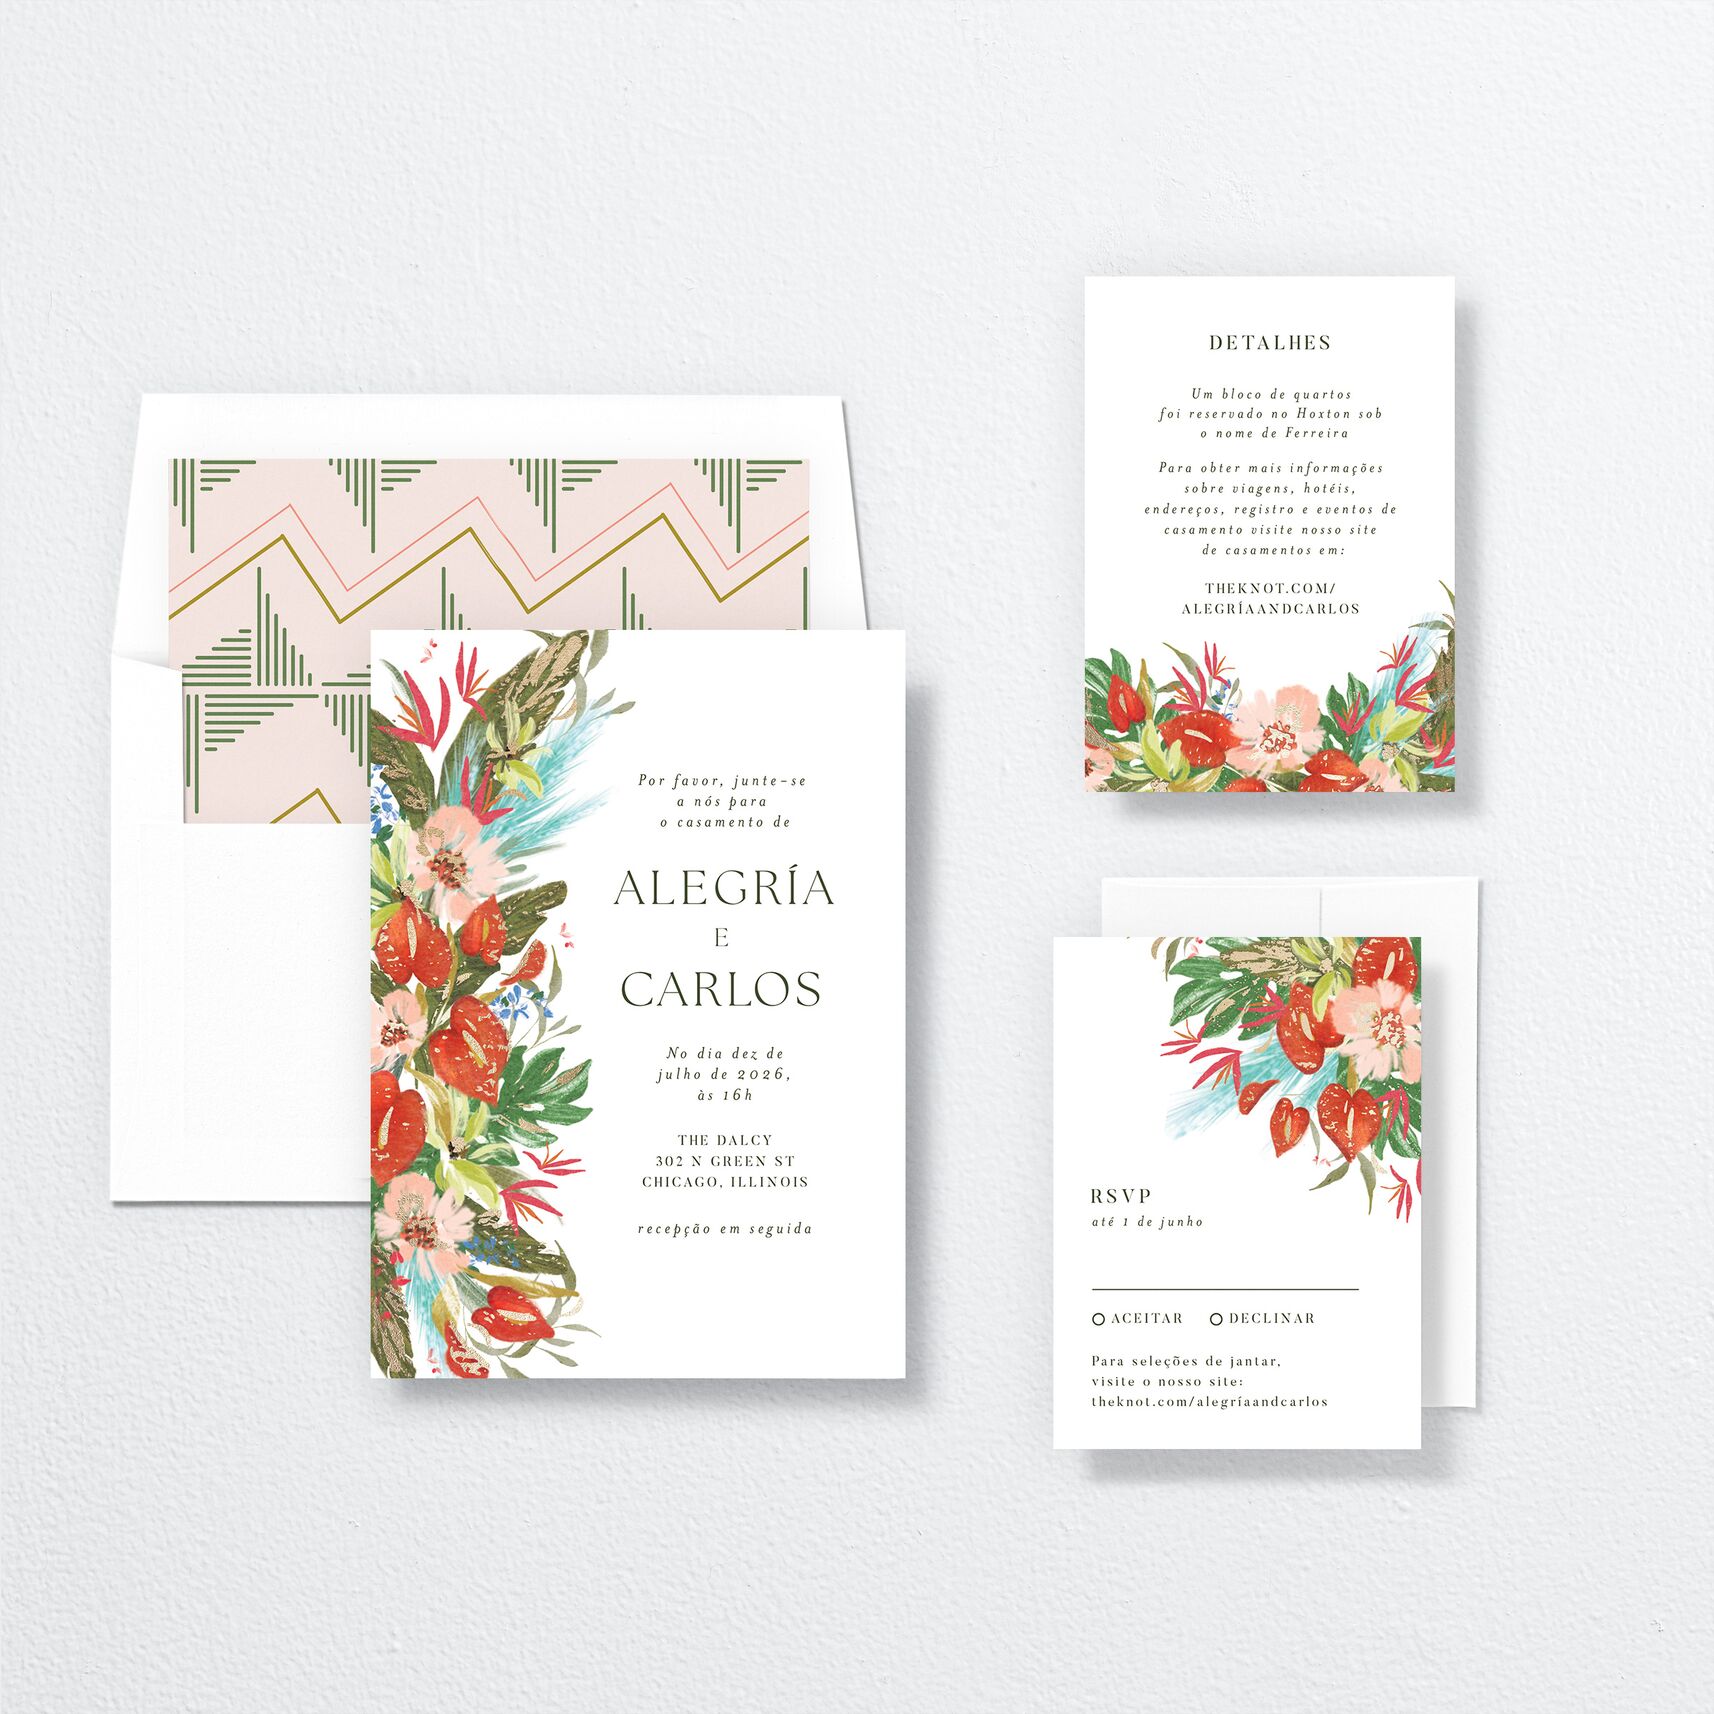 Flores Tropicais Wedding Invitations suite in red